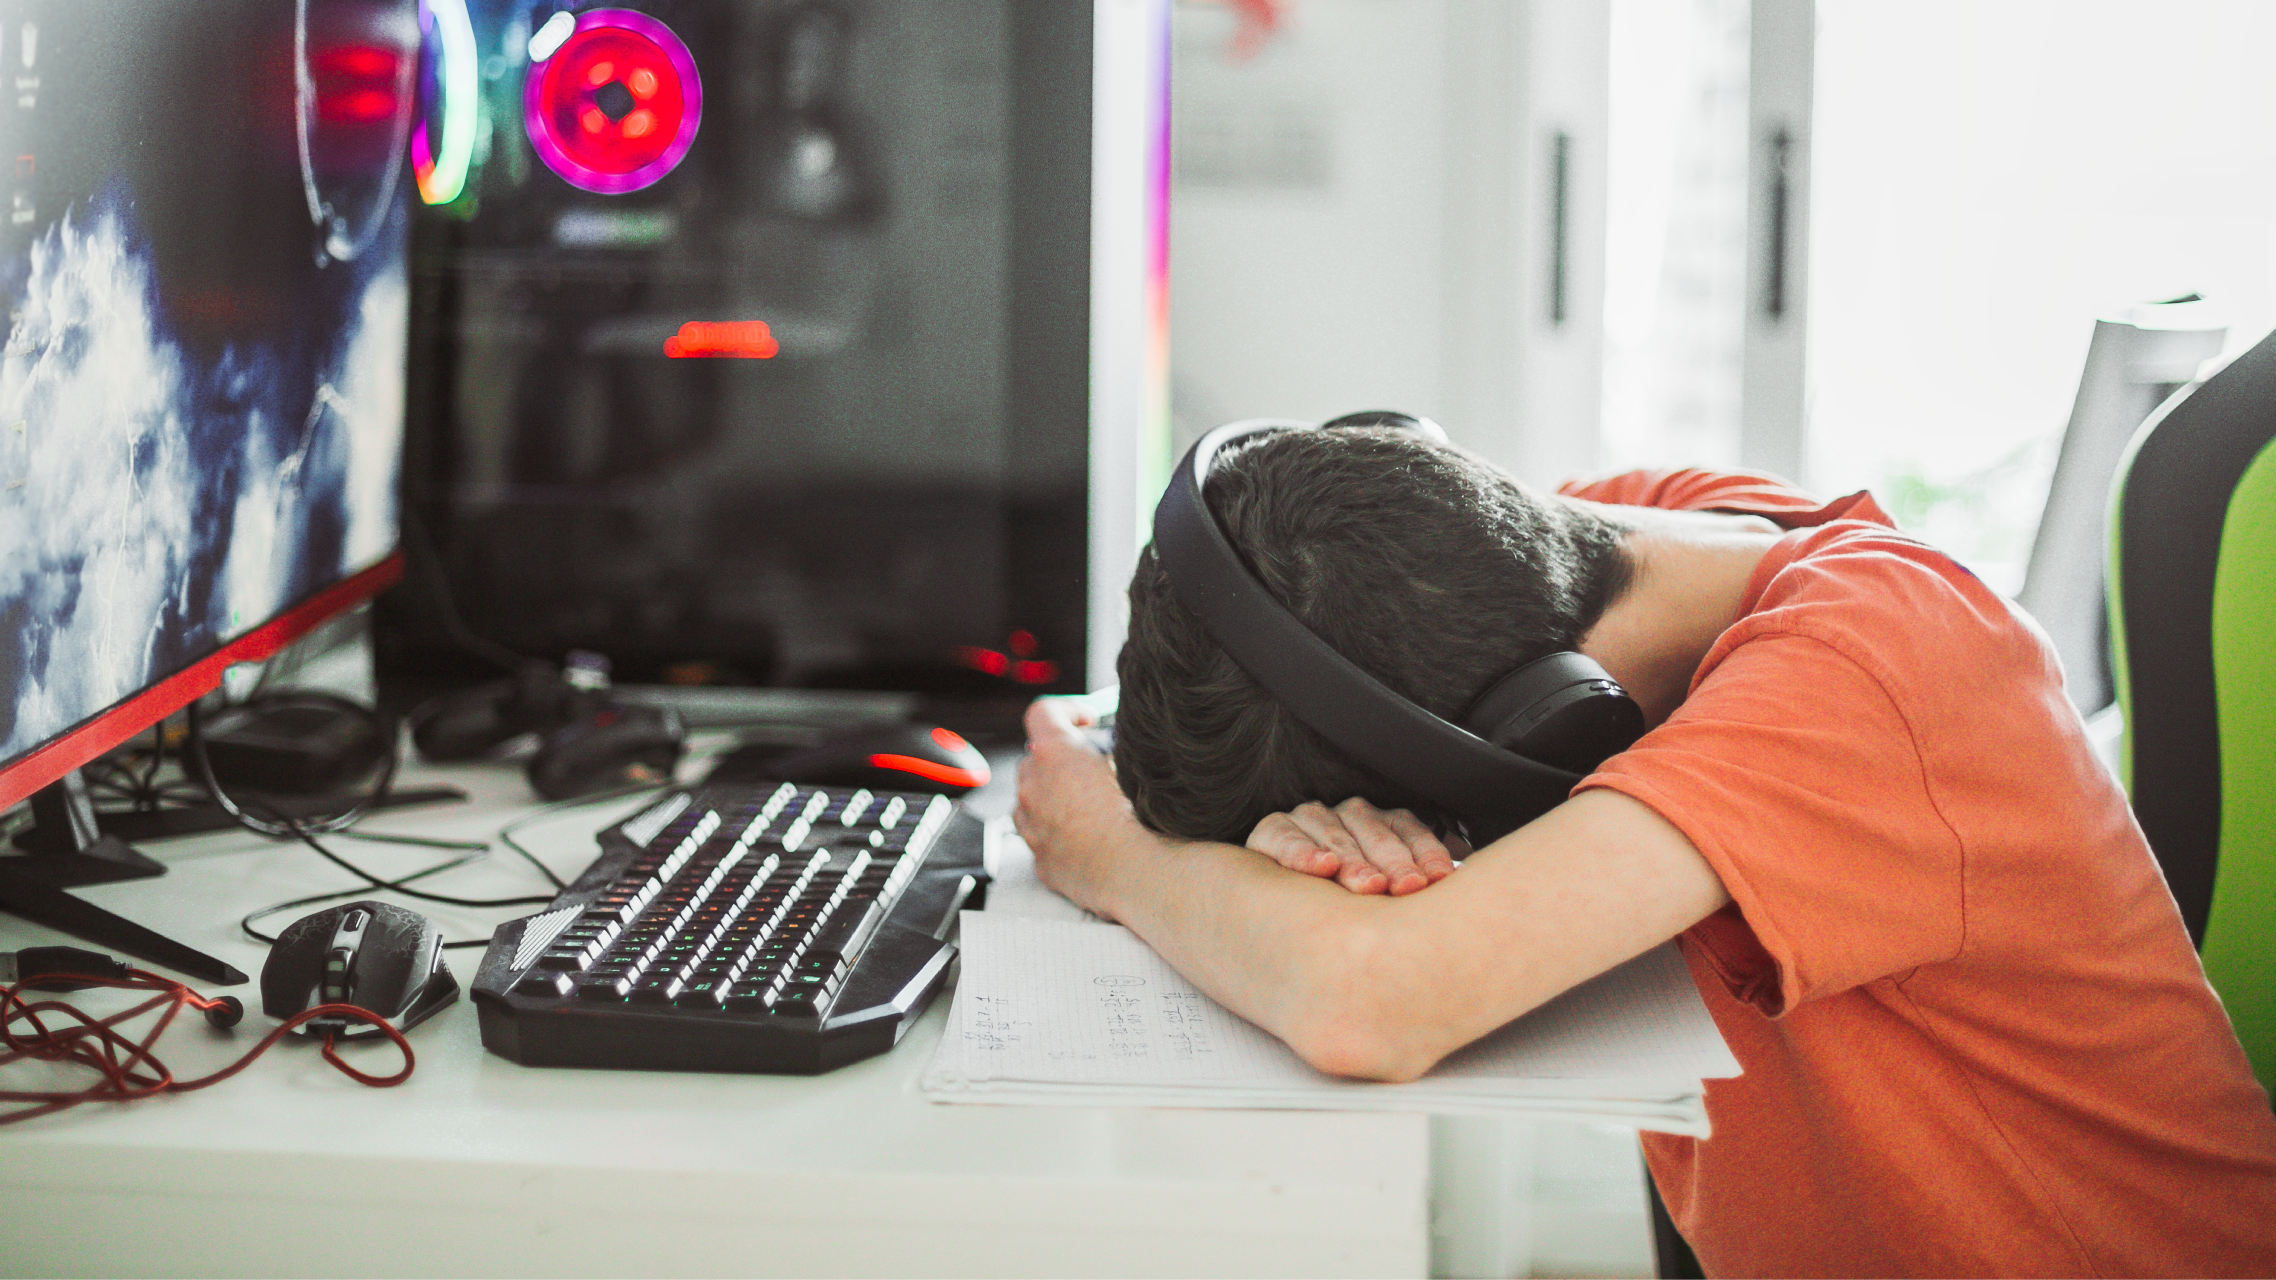 A cyberbullied student stressed and sitting at his desk with his head down in front of his computer